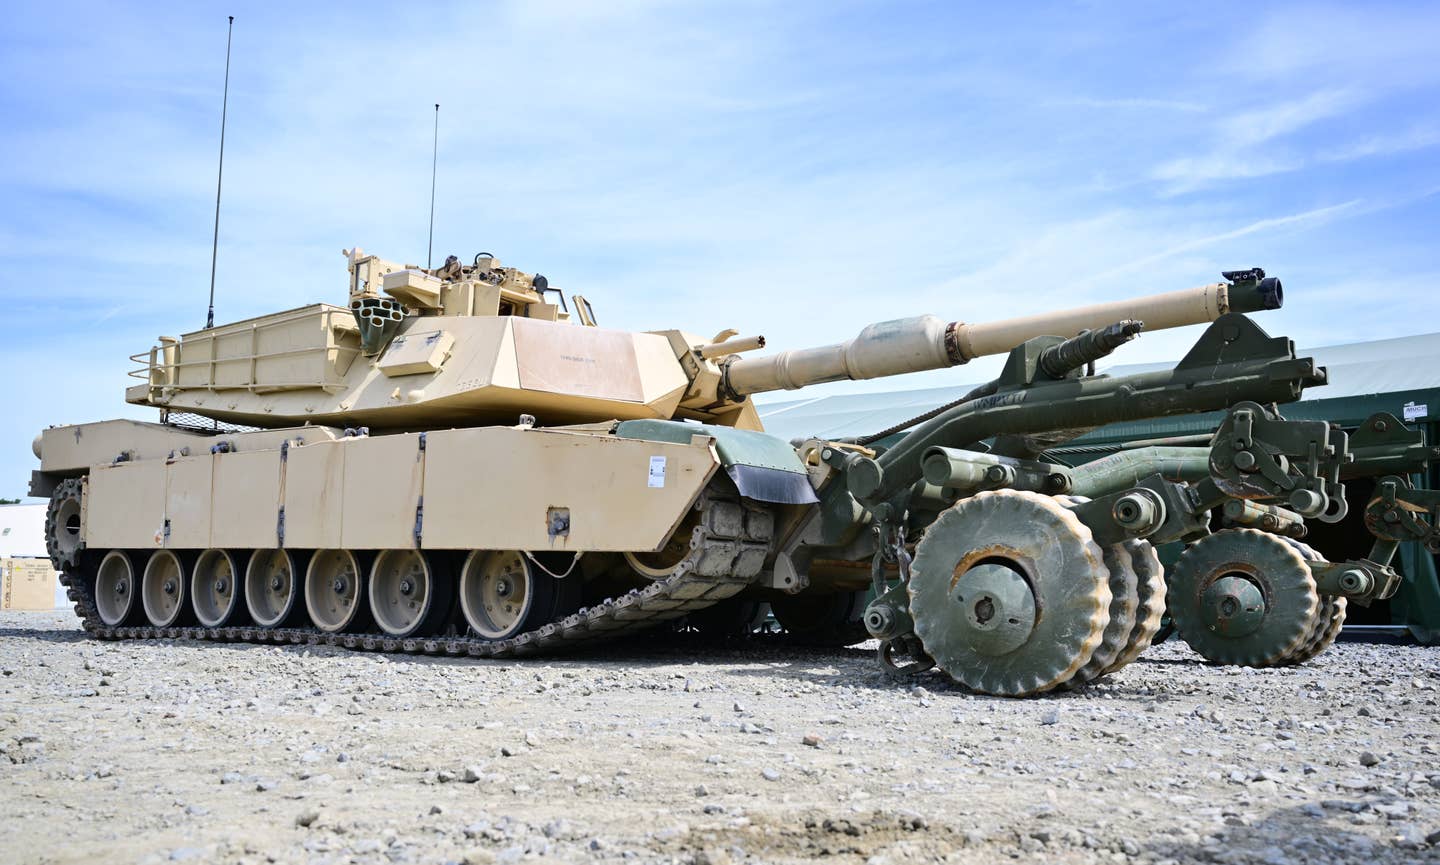 A U.S. Army M1A1 Abrams tank, photographed with mine roller mounted, as they will be delivered to Ukraine. In Grafenwoehr, the U.S. Army trains members of the Ukrainian armed forces for use on the American M1A1 Abrams tank. Photo: Matthias Merz/dpa (Photo by Matthias Merz/picture alliance via Getty Images)